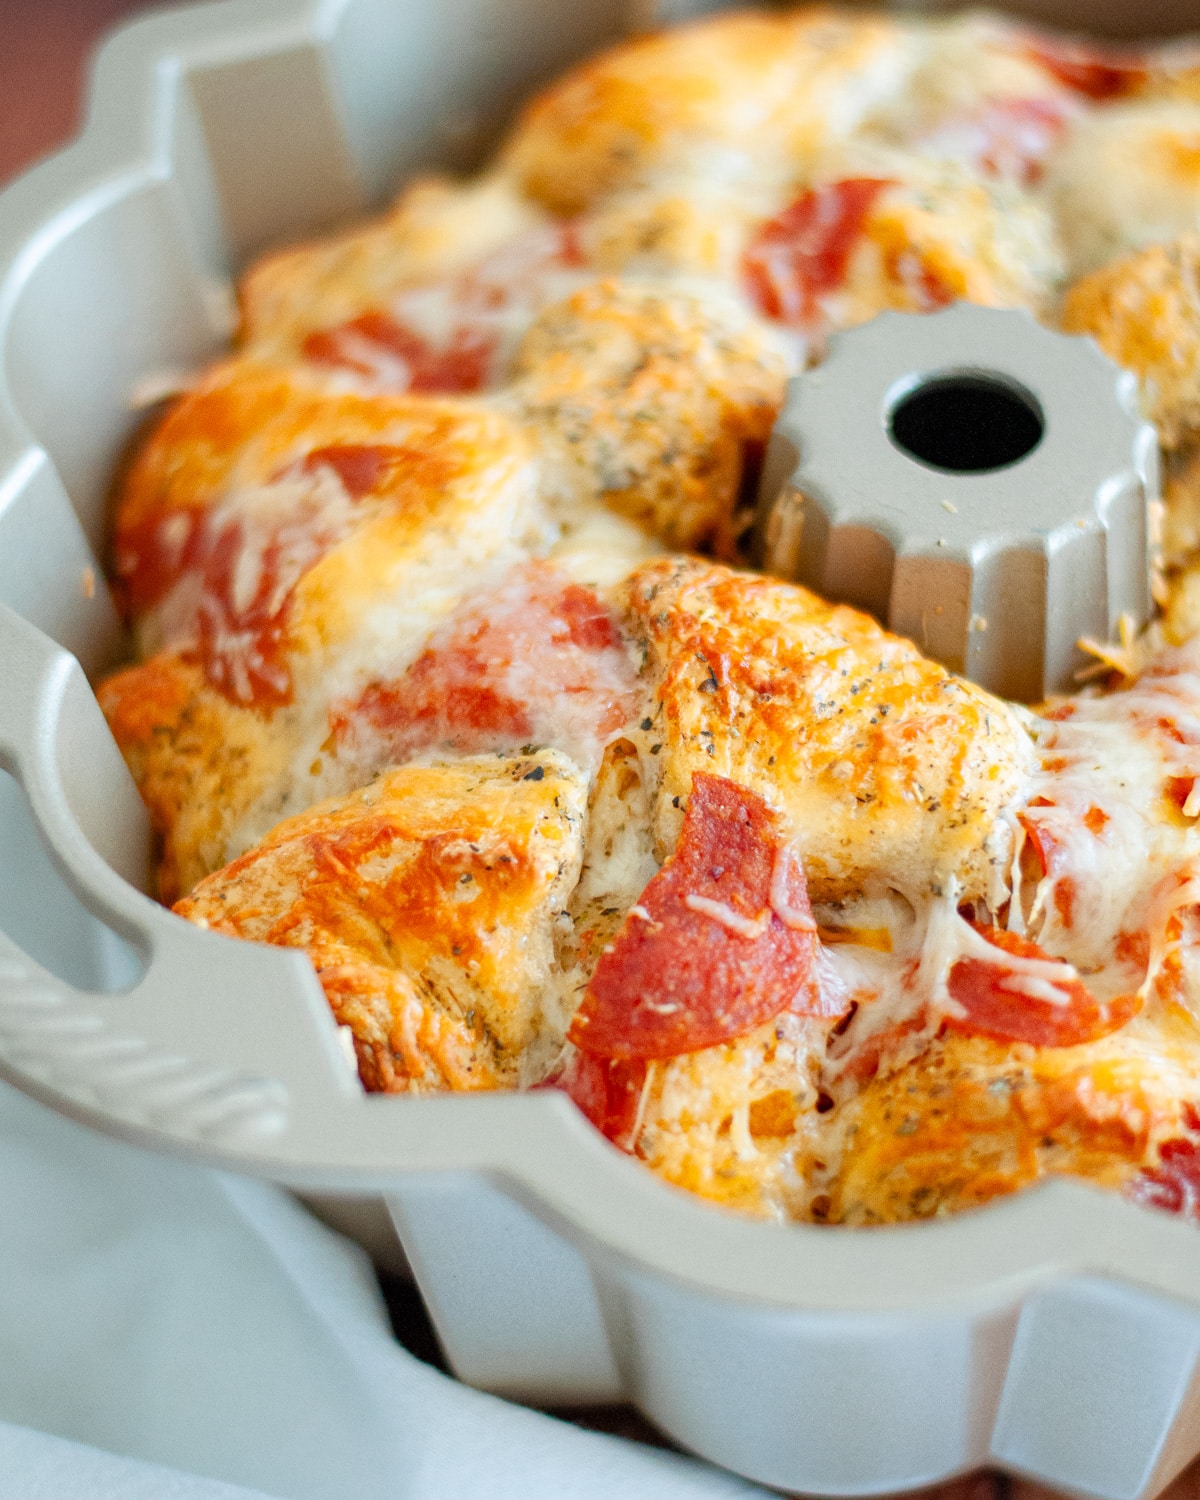 pepperoni pizza monkey bread fresh out of the oven. the dough is toasted to a perfect golden-brown, and the cheese is nice and melty.